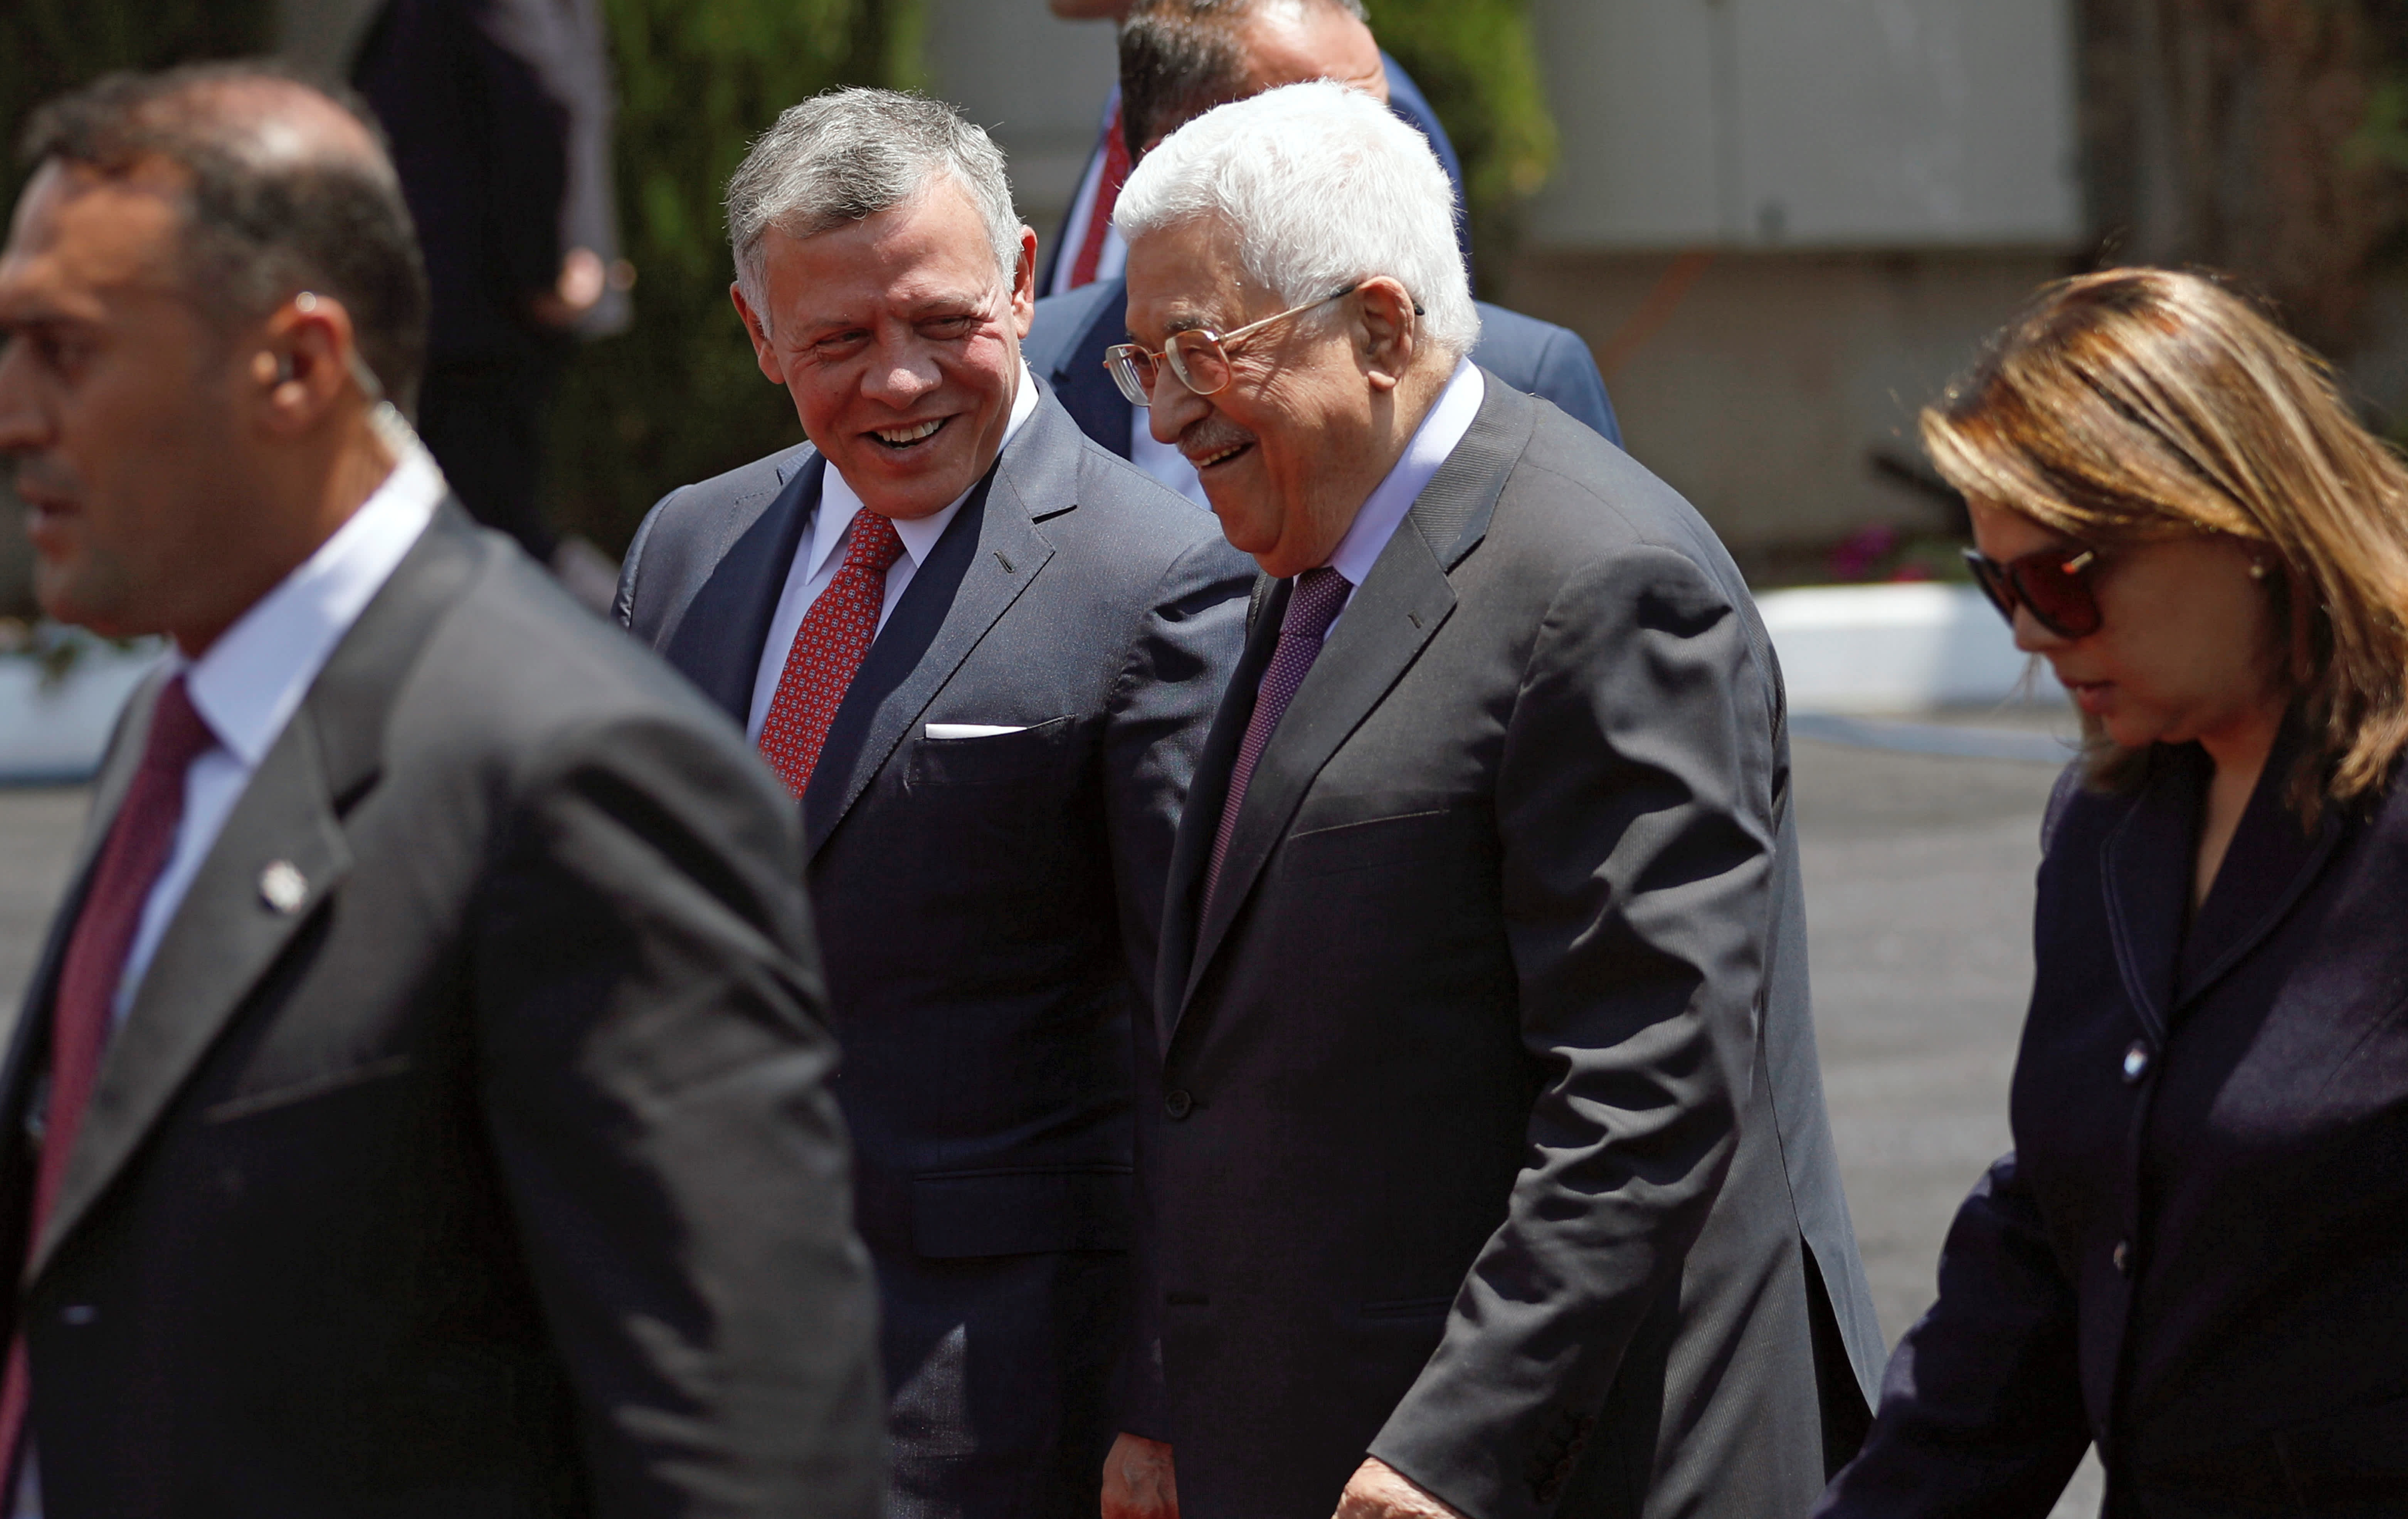 Jordan's King Abdullah II walks with Palestinian Authority President Mahmoud Abbas during a reception ceremony in the West Bank city of Ramallah